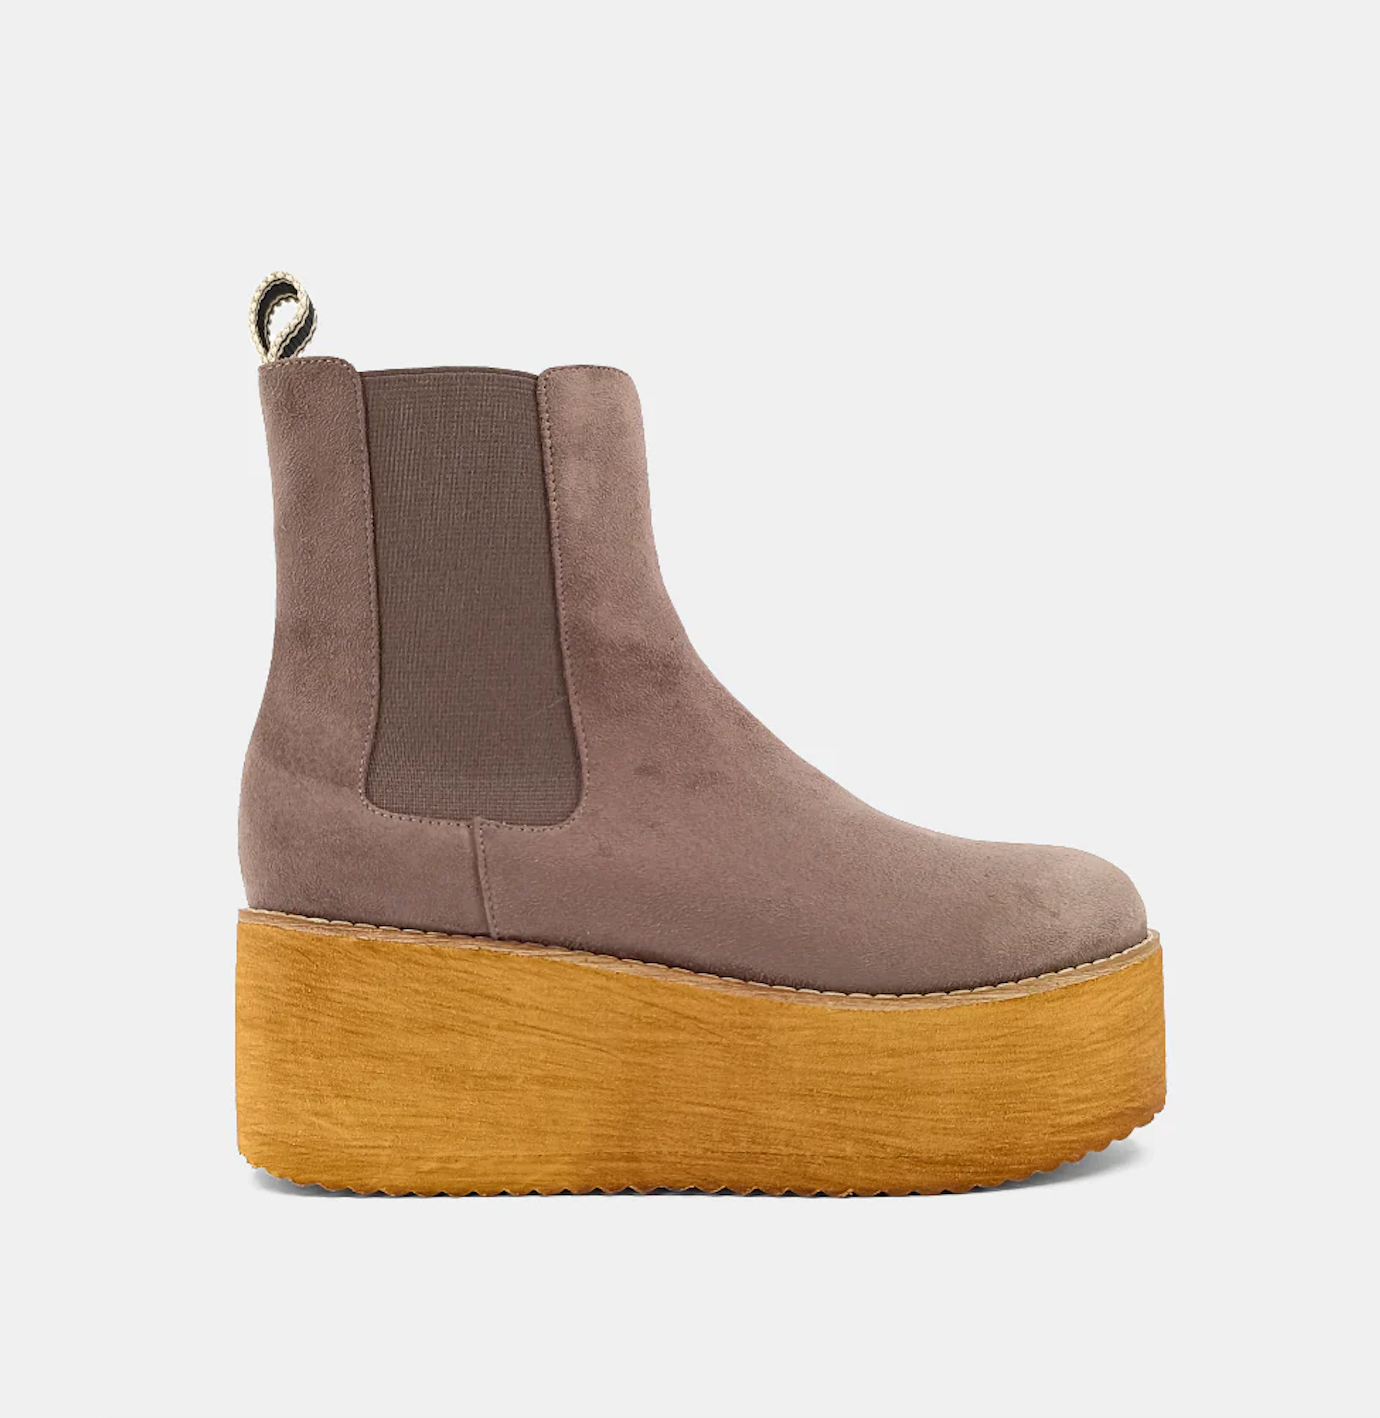 SHUSHOP YOSHI BOOTS IN TAUPE SUEDE